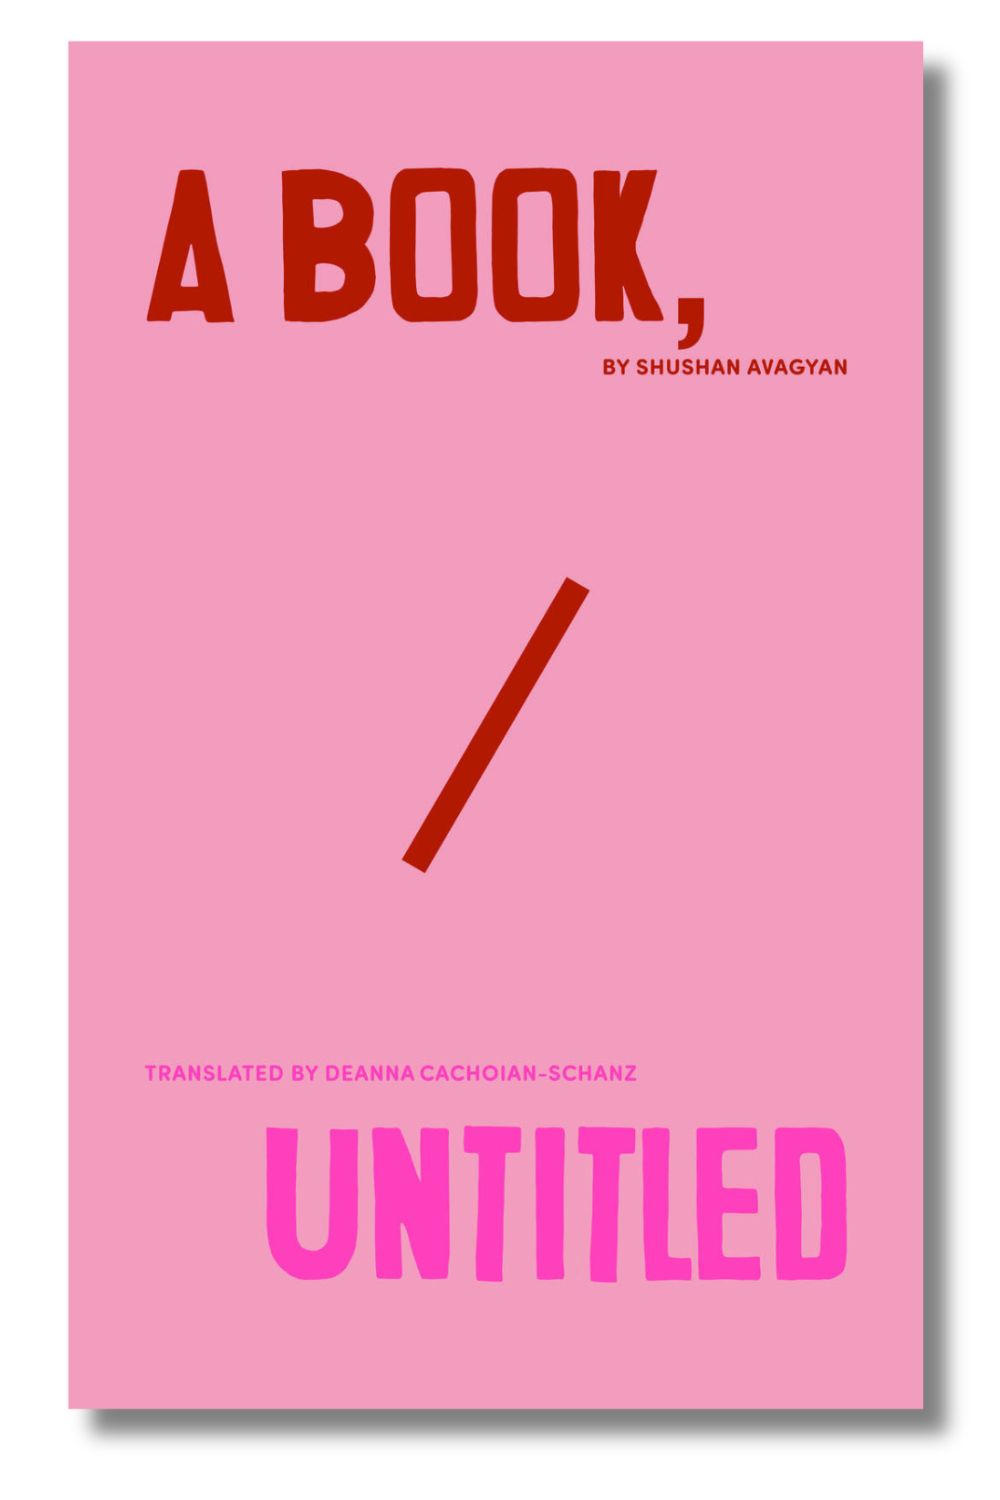 The cover of "A Book, Untitled" by Shushan Avagyan, tr. by Deanna Cachoian-Schanz